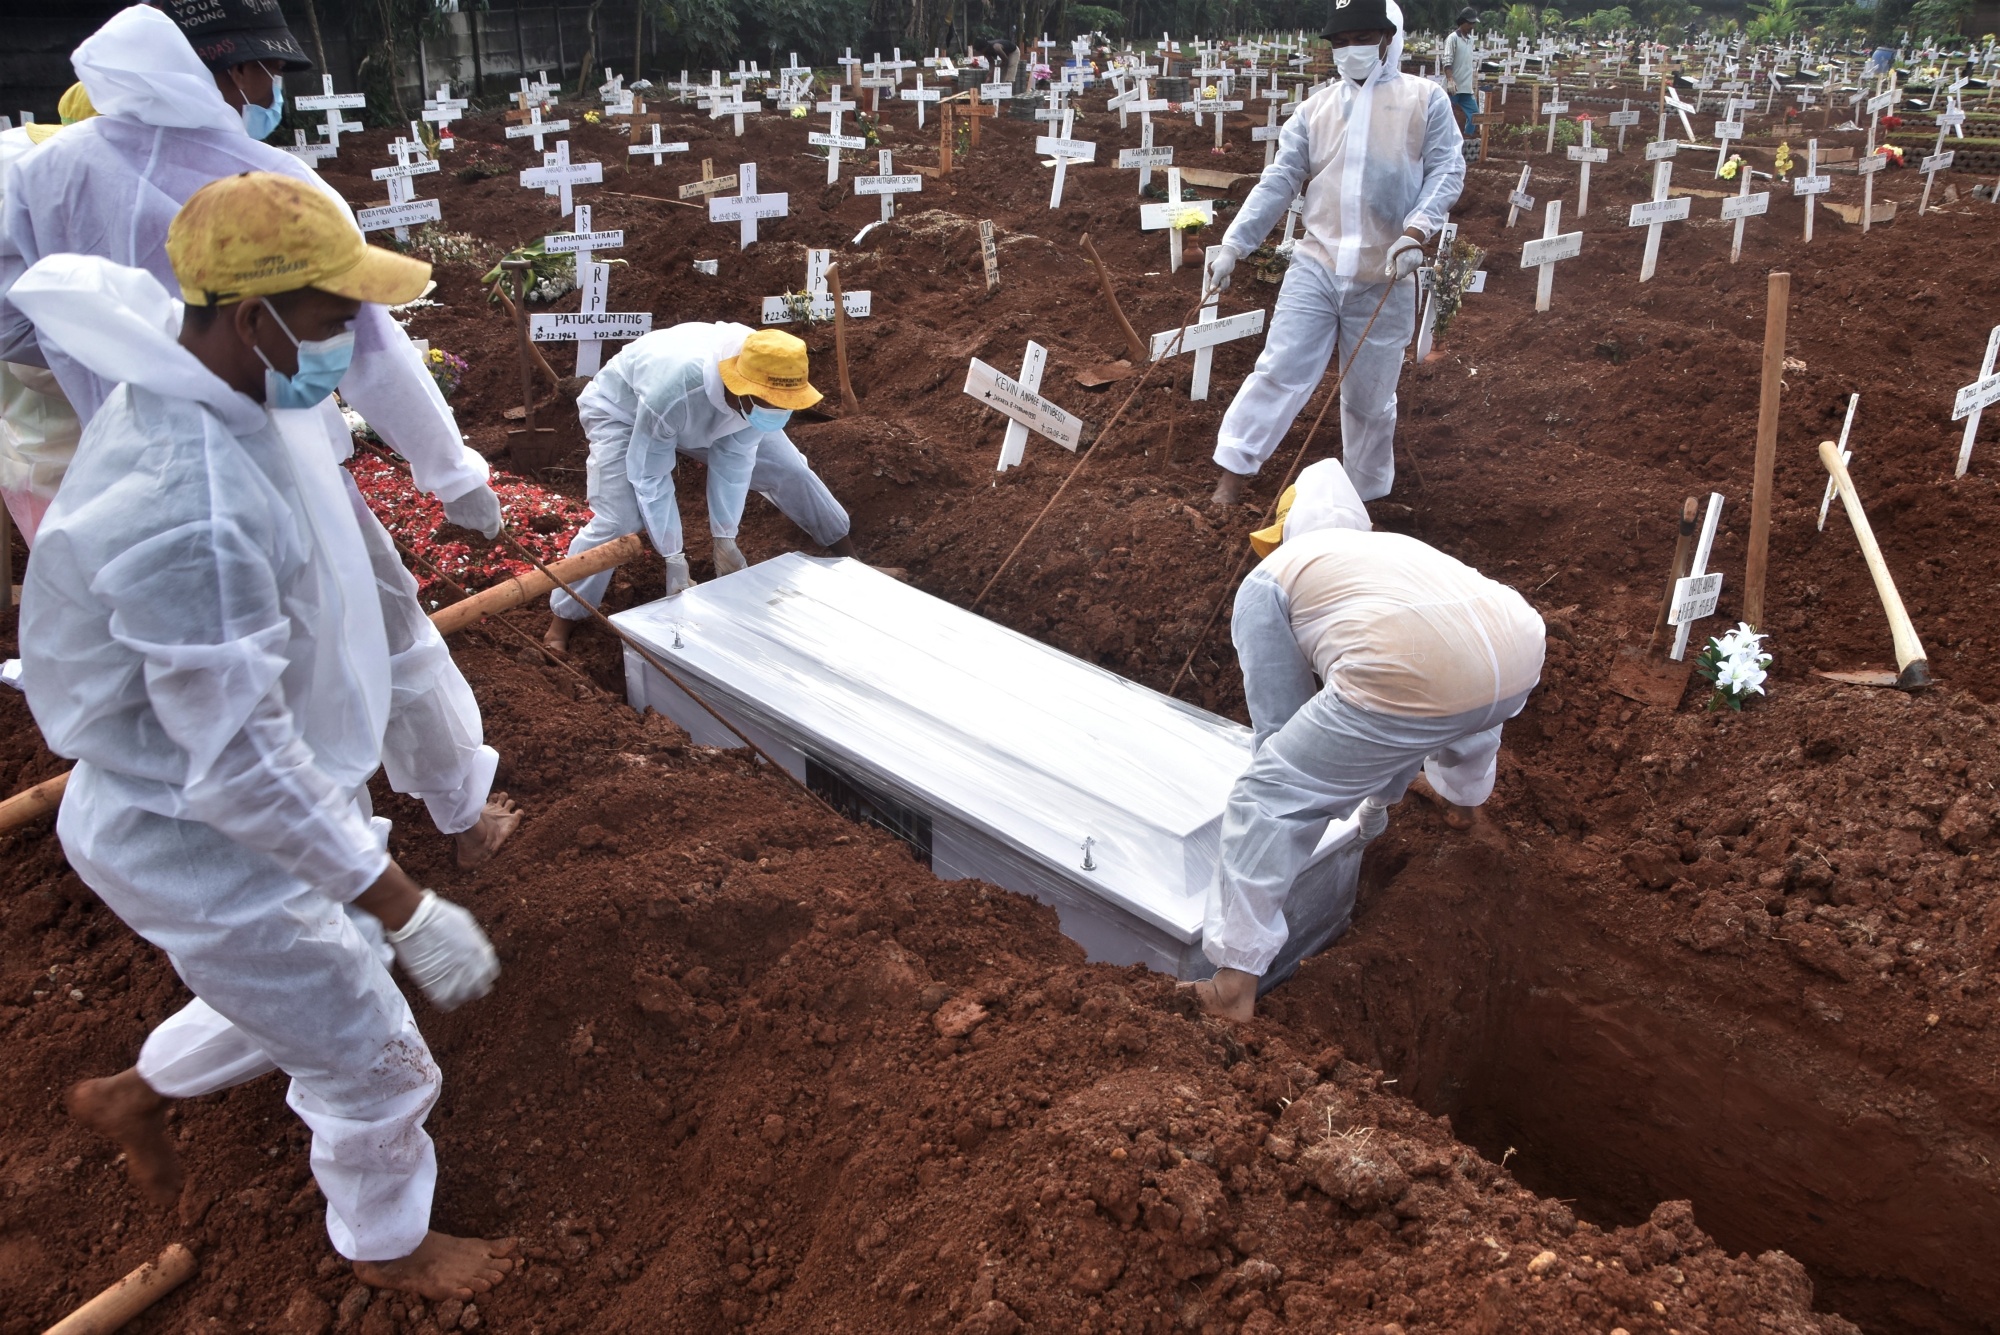 The coffin of a person who died from the coronavirus is buried at a cemetary in Bekasi, Indonesia, on Aug. 6.